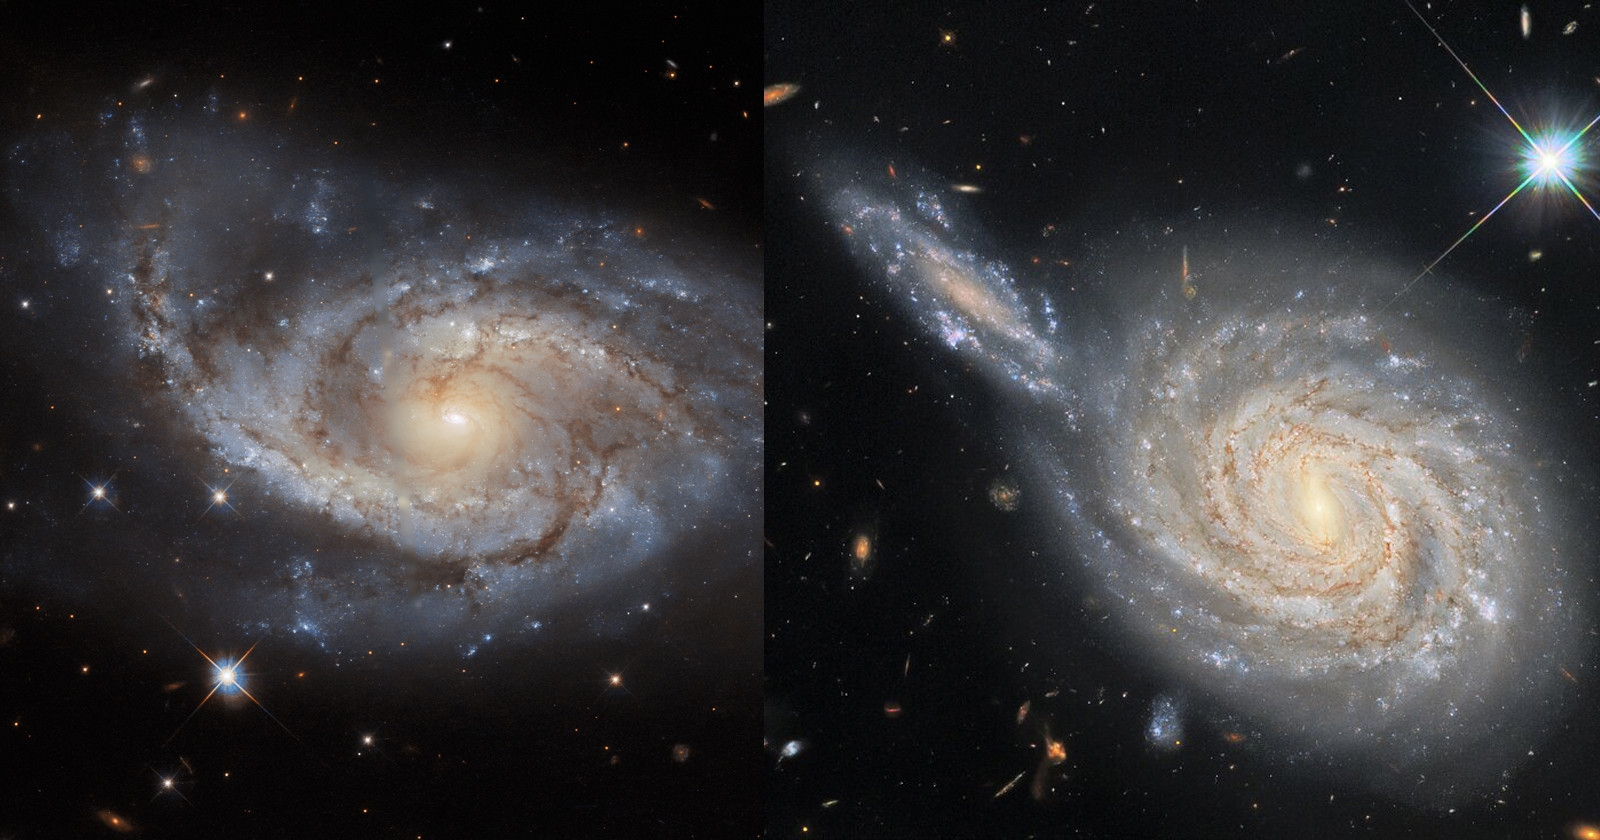  hubble photos show how astronomy perspective matters 